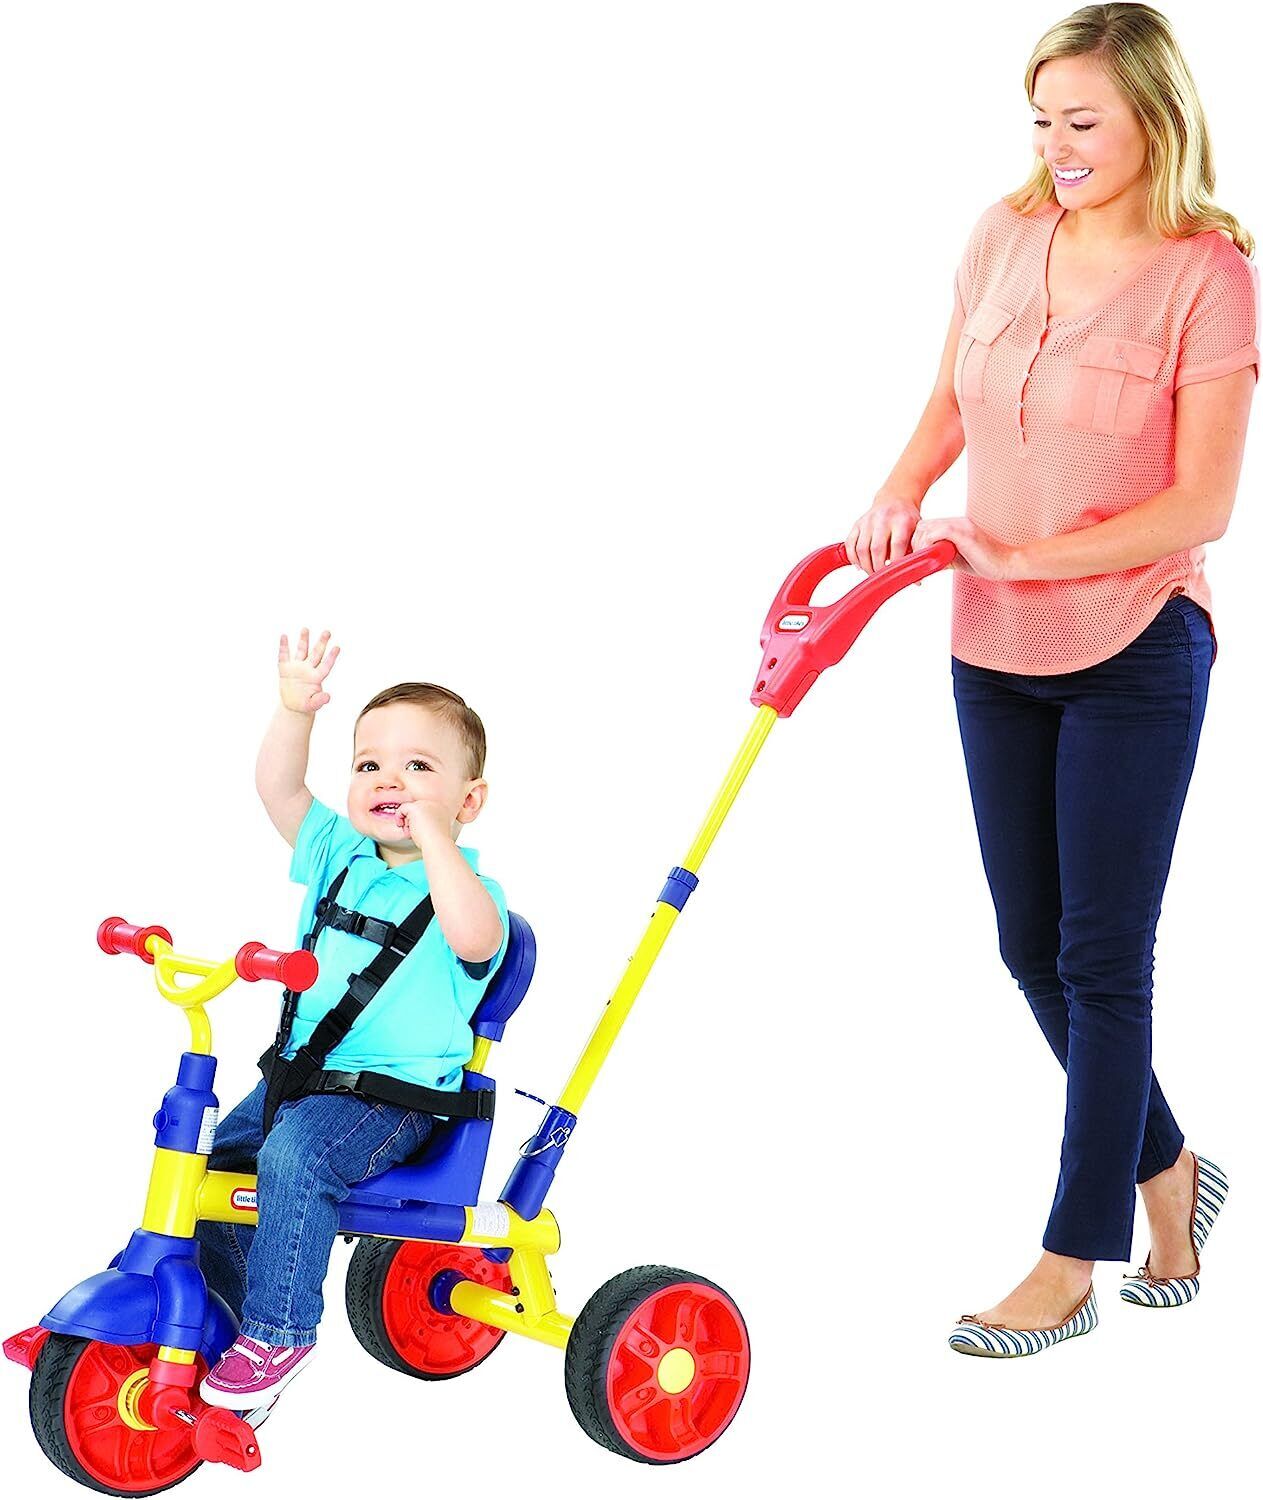 Little tikes Learn to Pedal 3-In-1 Trike Ride on Toy for Children